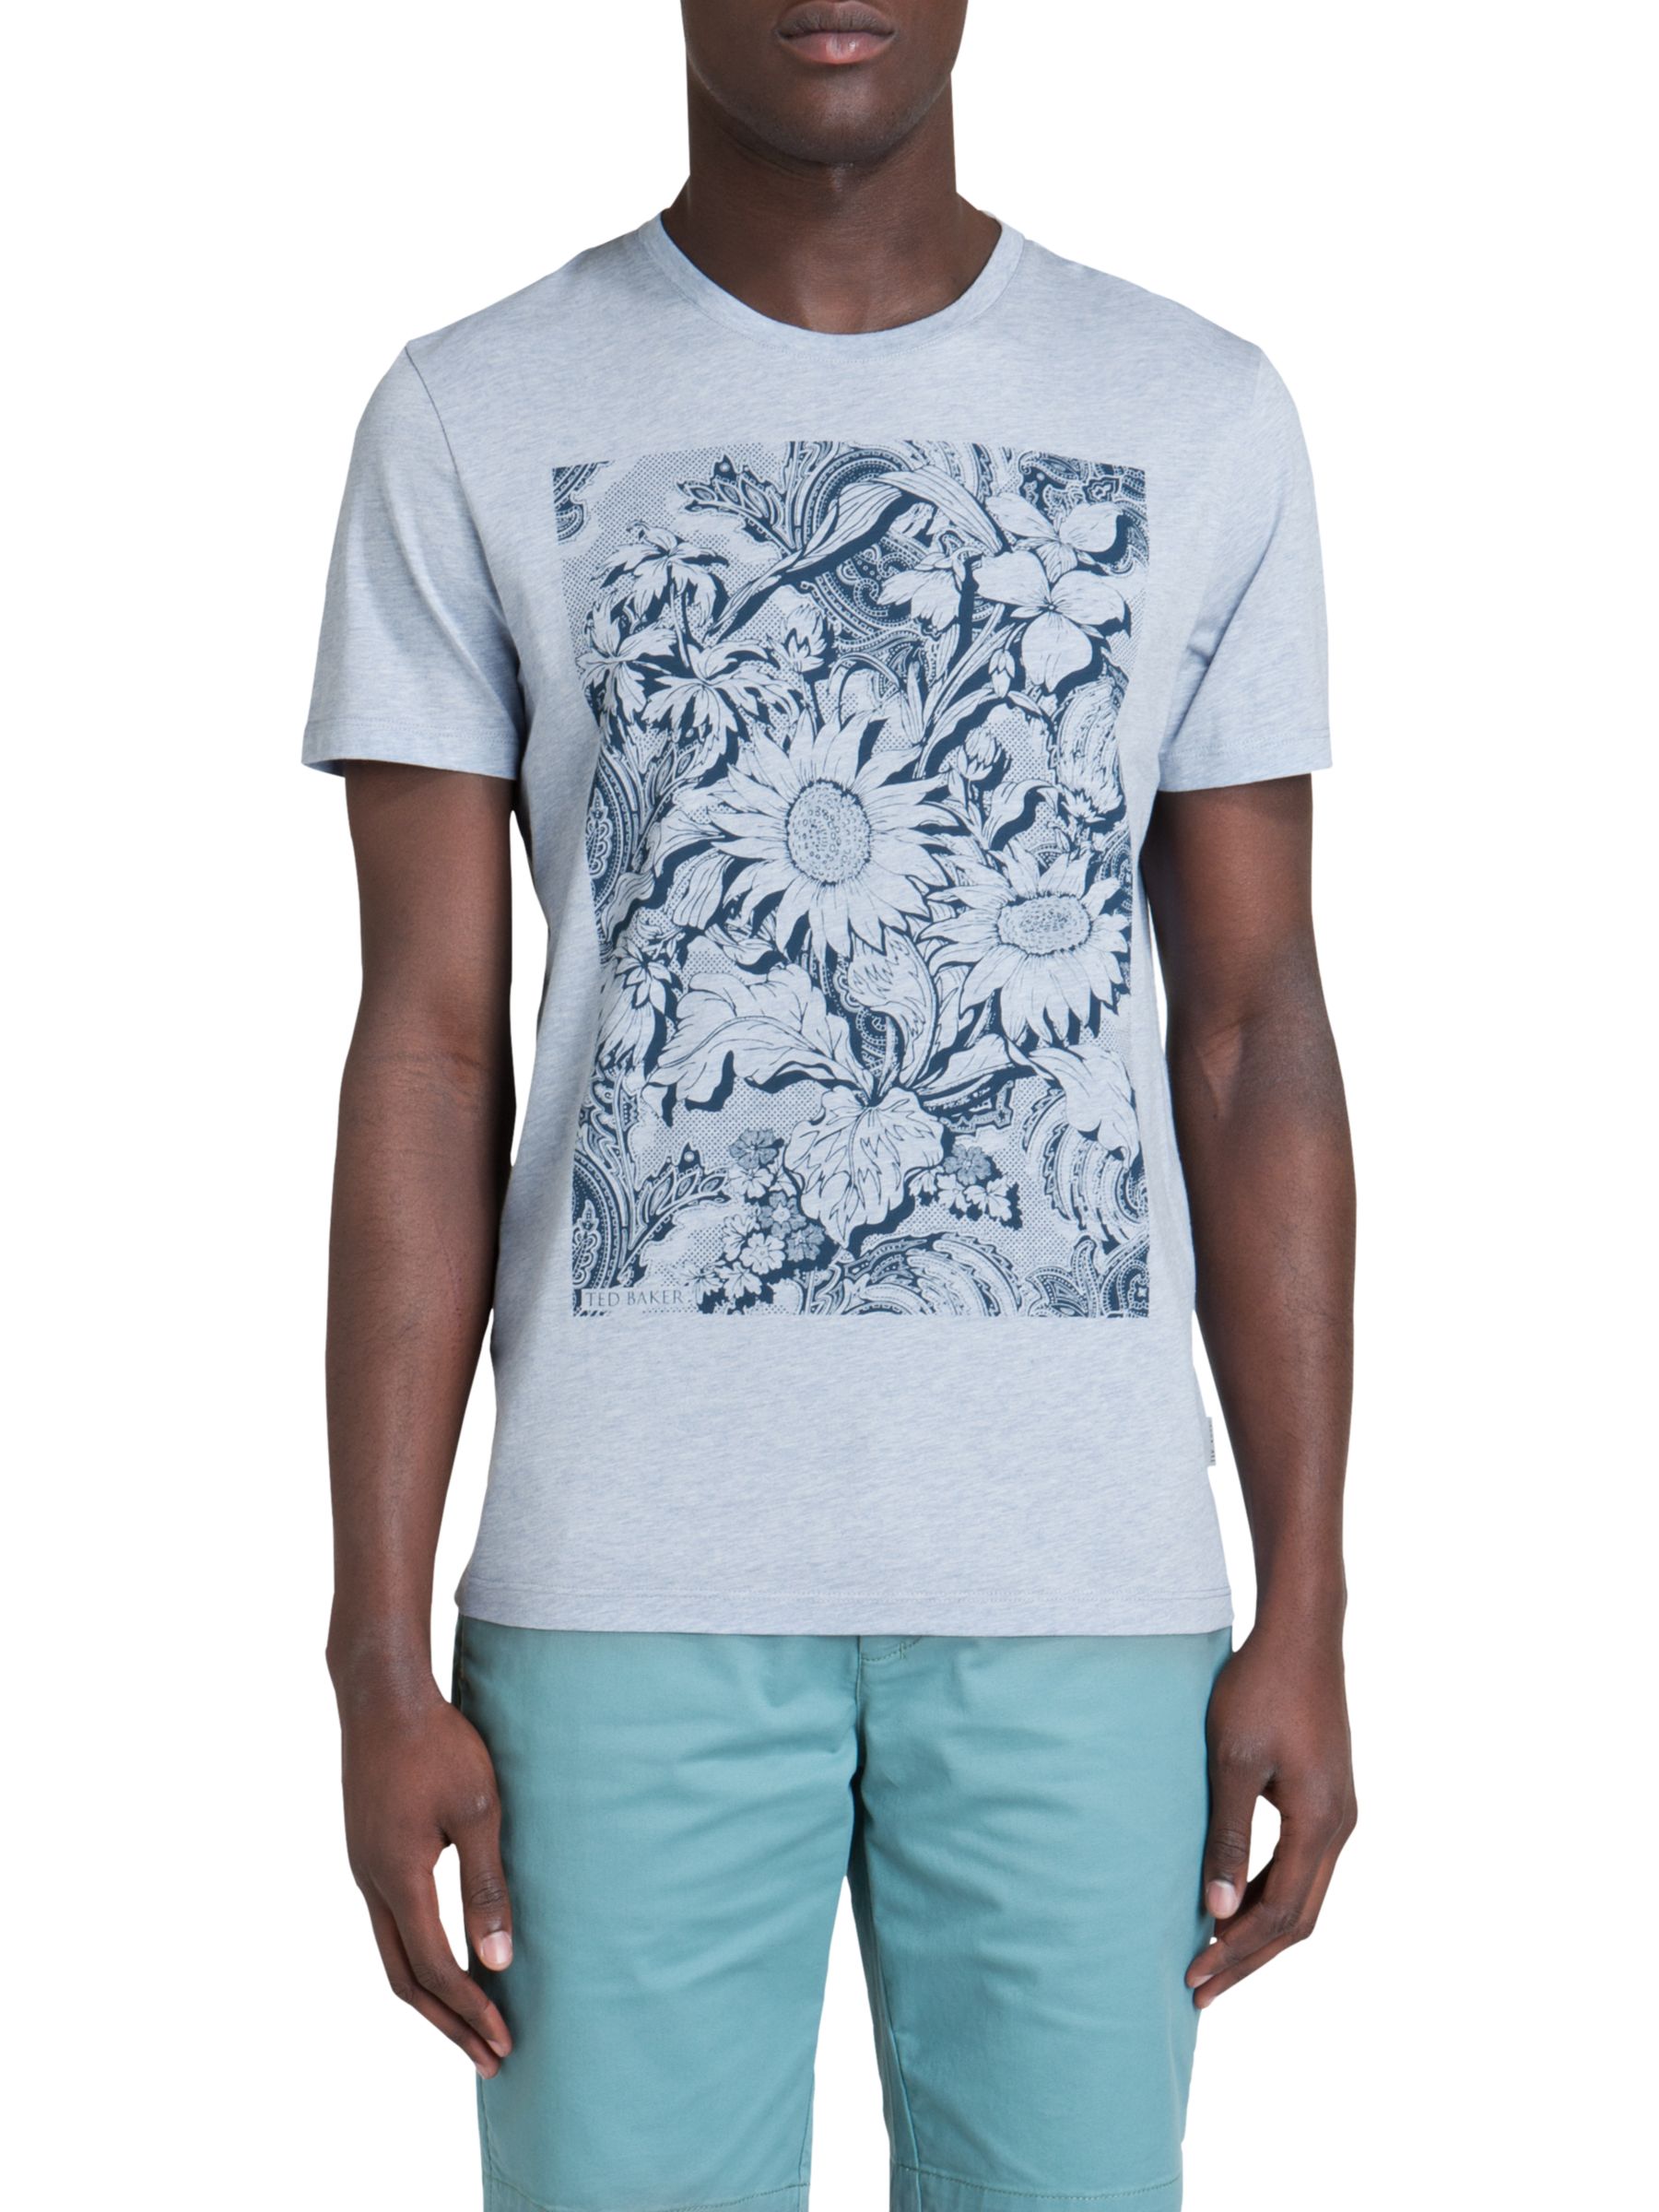 Ted Baker Fannwel Graphic Floral T-Shirt at John Lewis & Partners